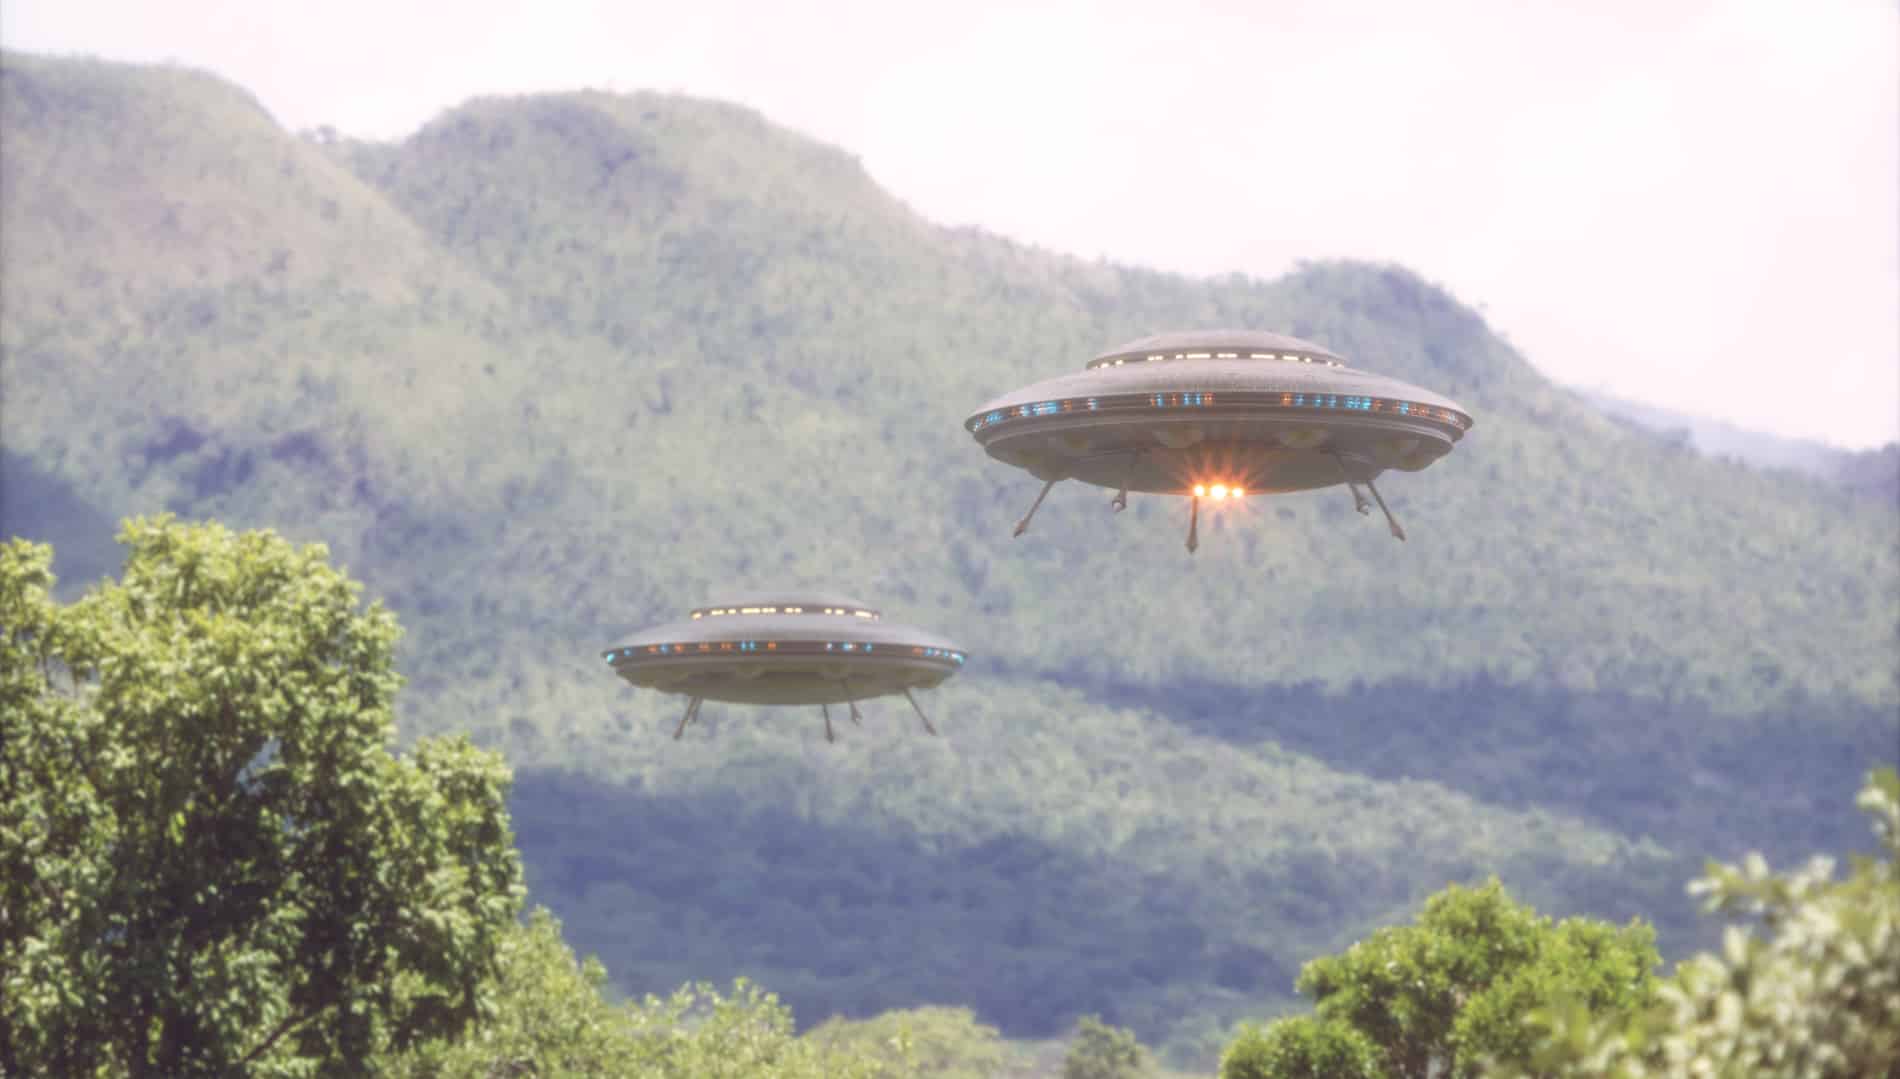 UFOs fly over a park; they can prove as distracting as the social media.